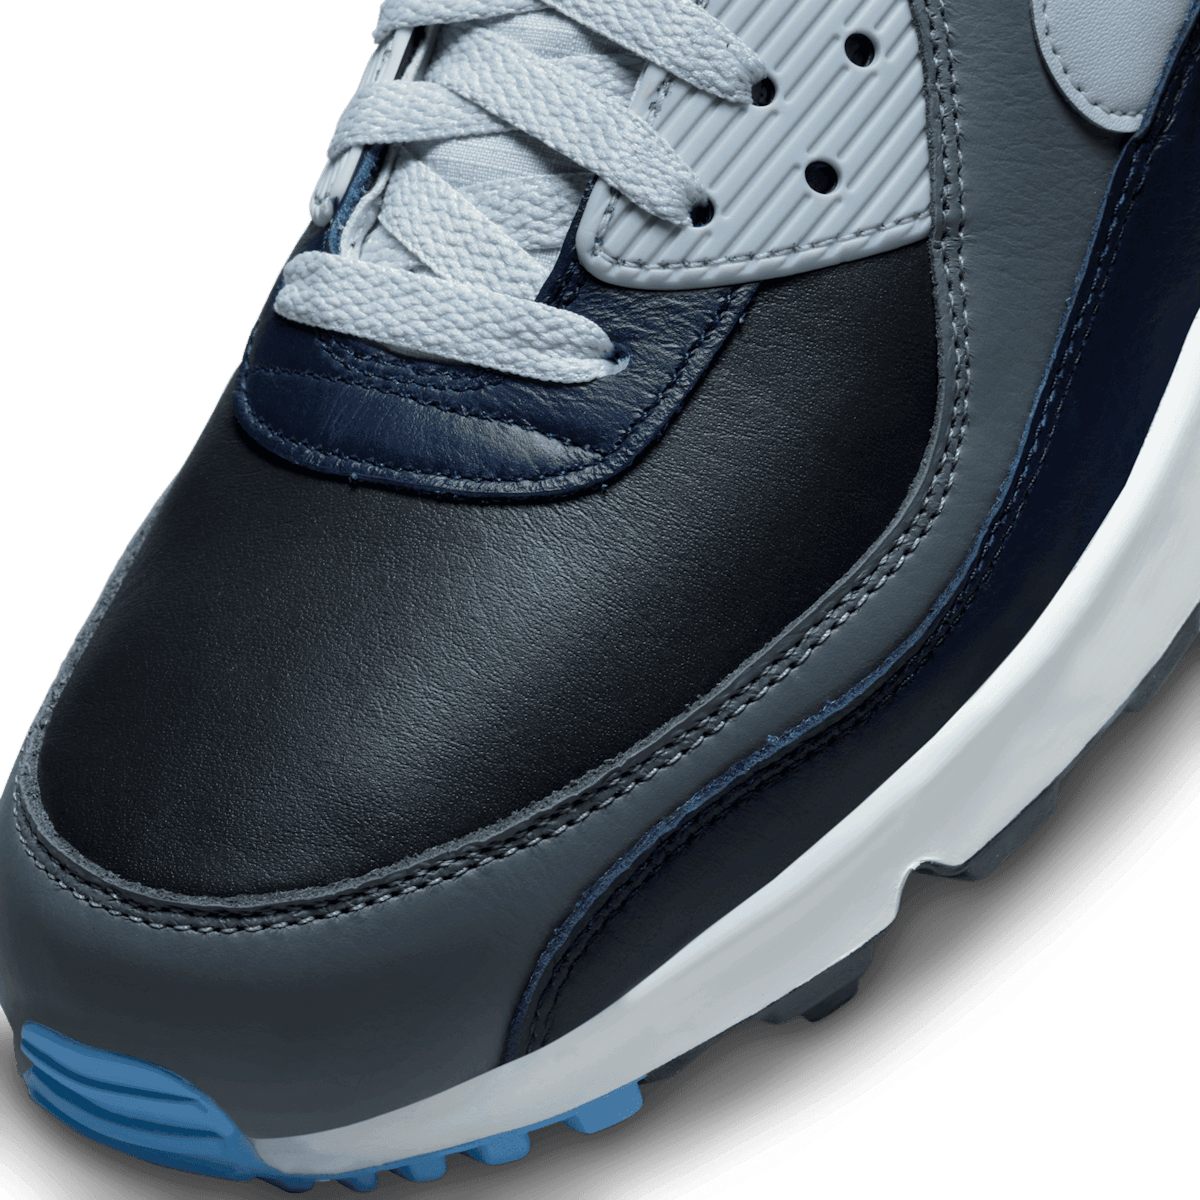 Nike Air Max 90 Gore-Tex Anthracite Obsidian Angle 4